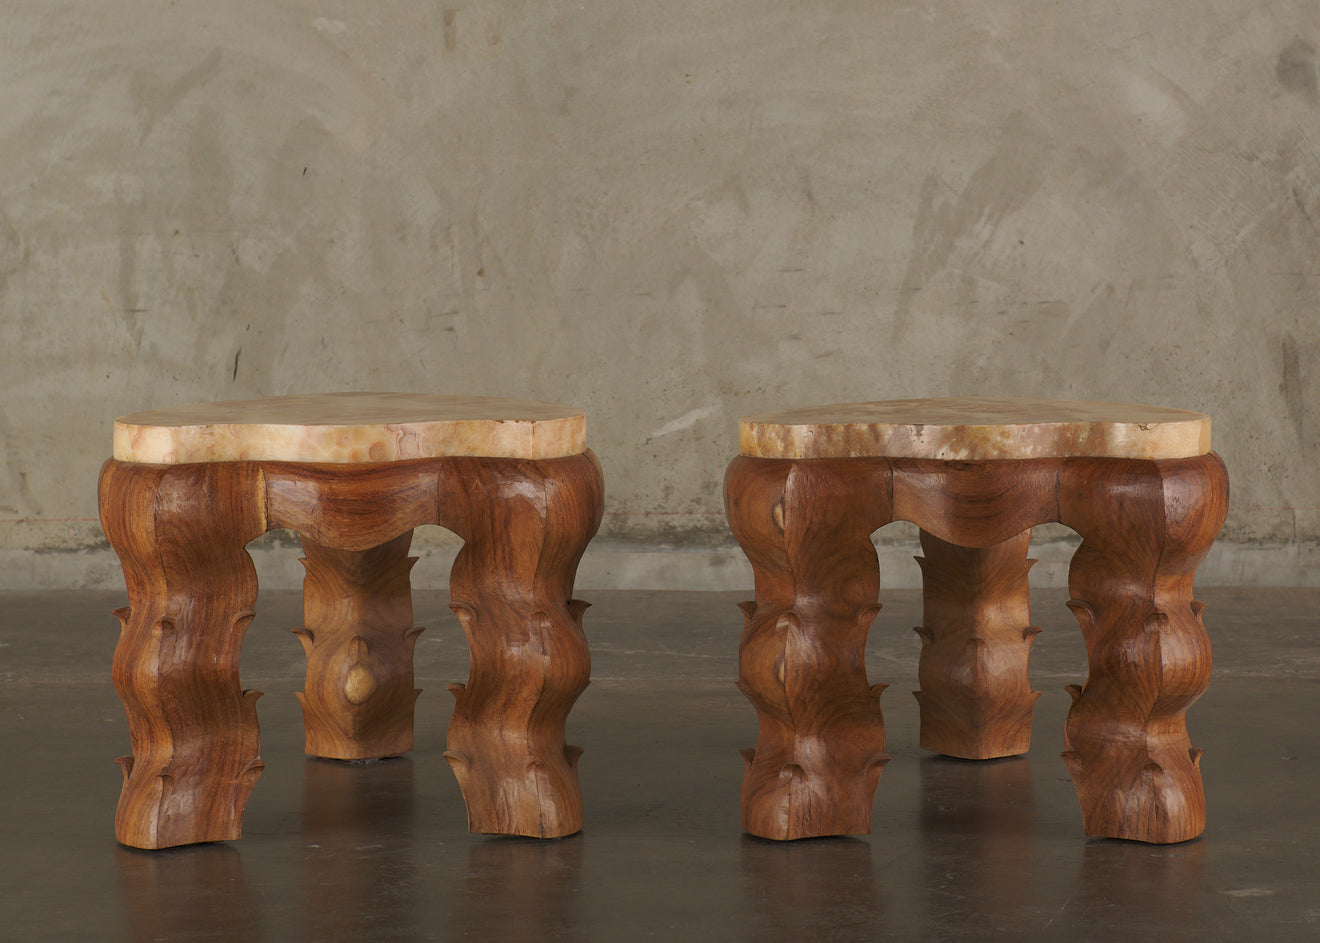 PAIR OF AREQUIPA SIDE TABLES BY MIKE DIAZ